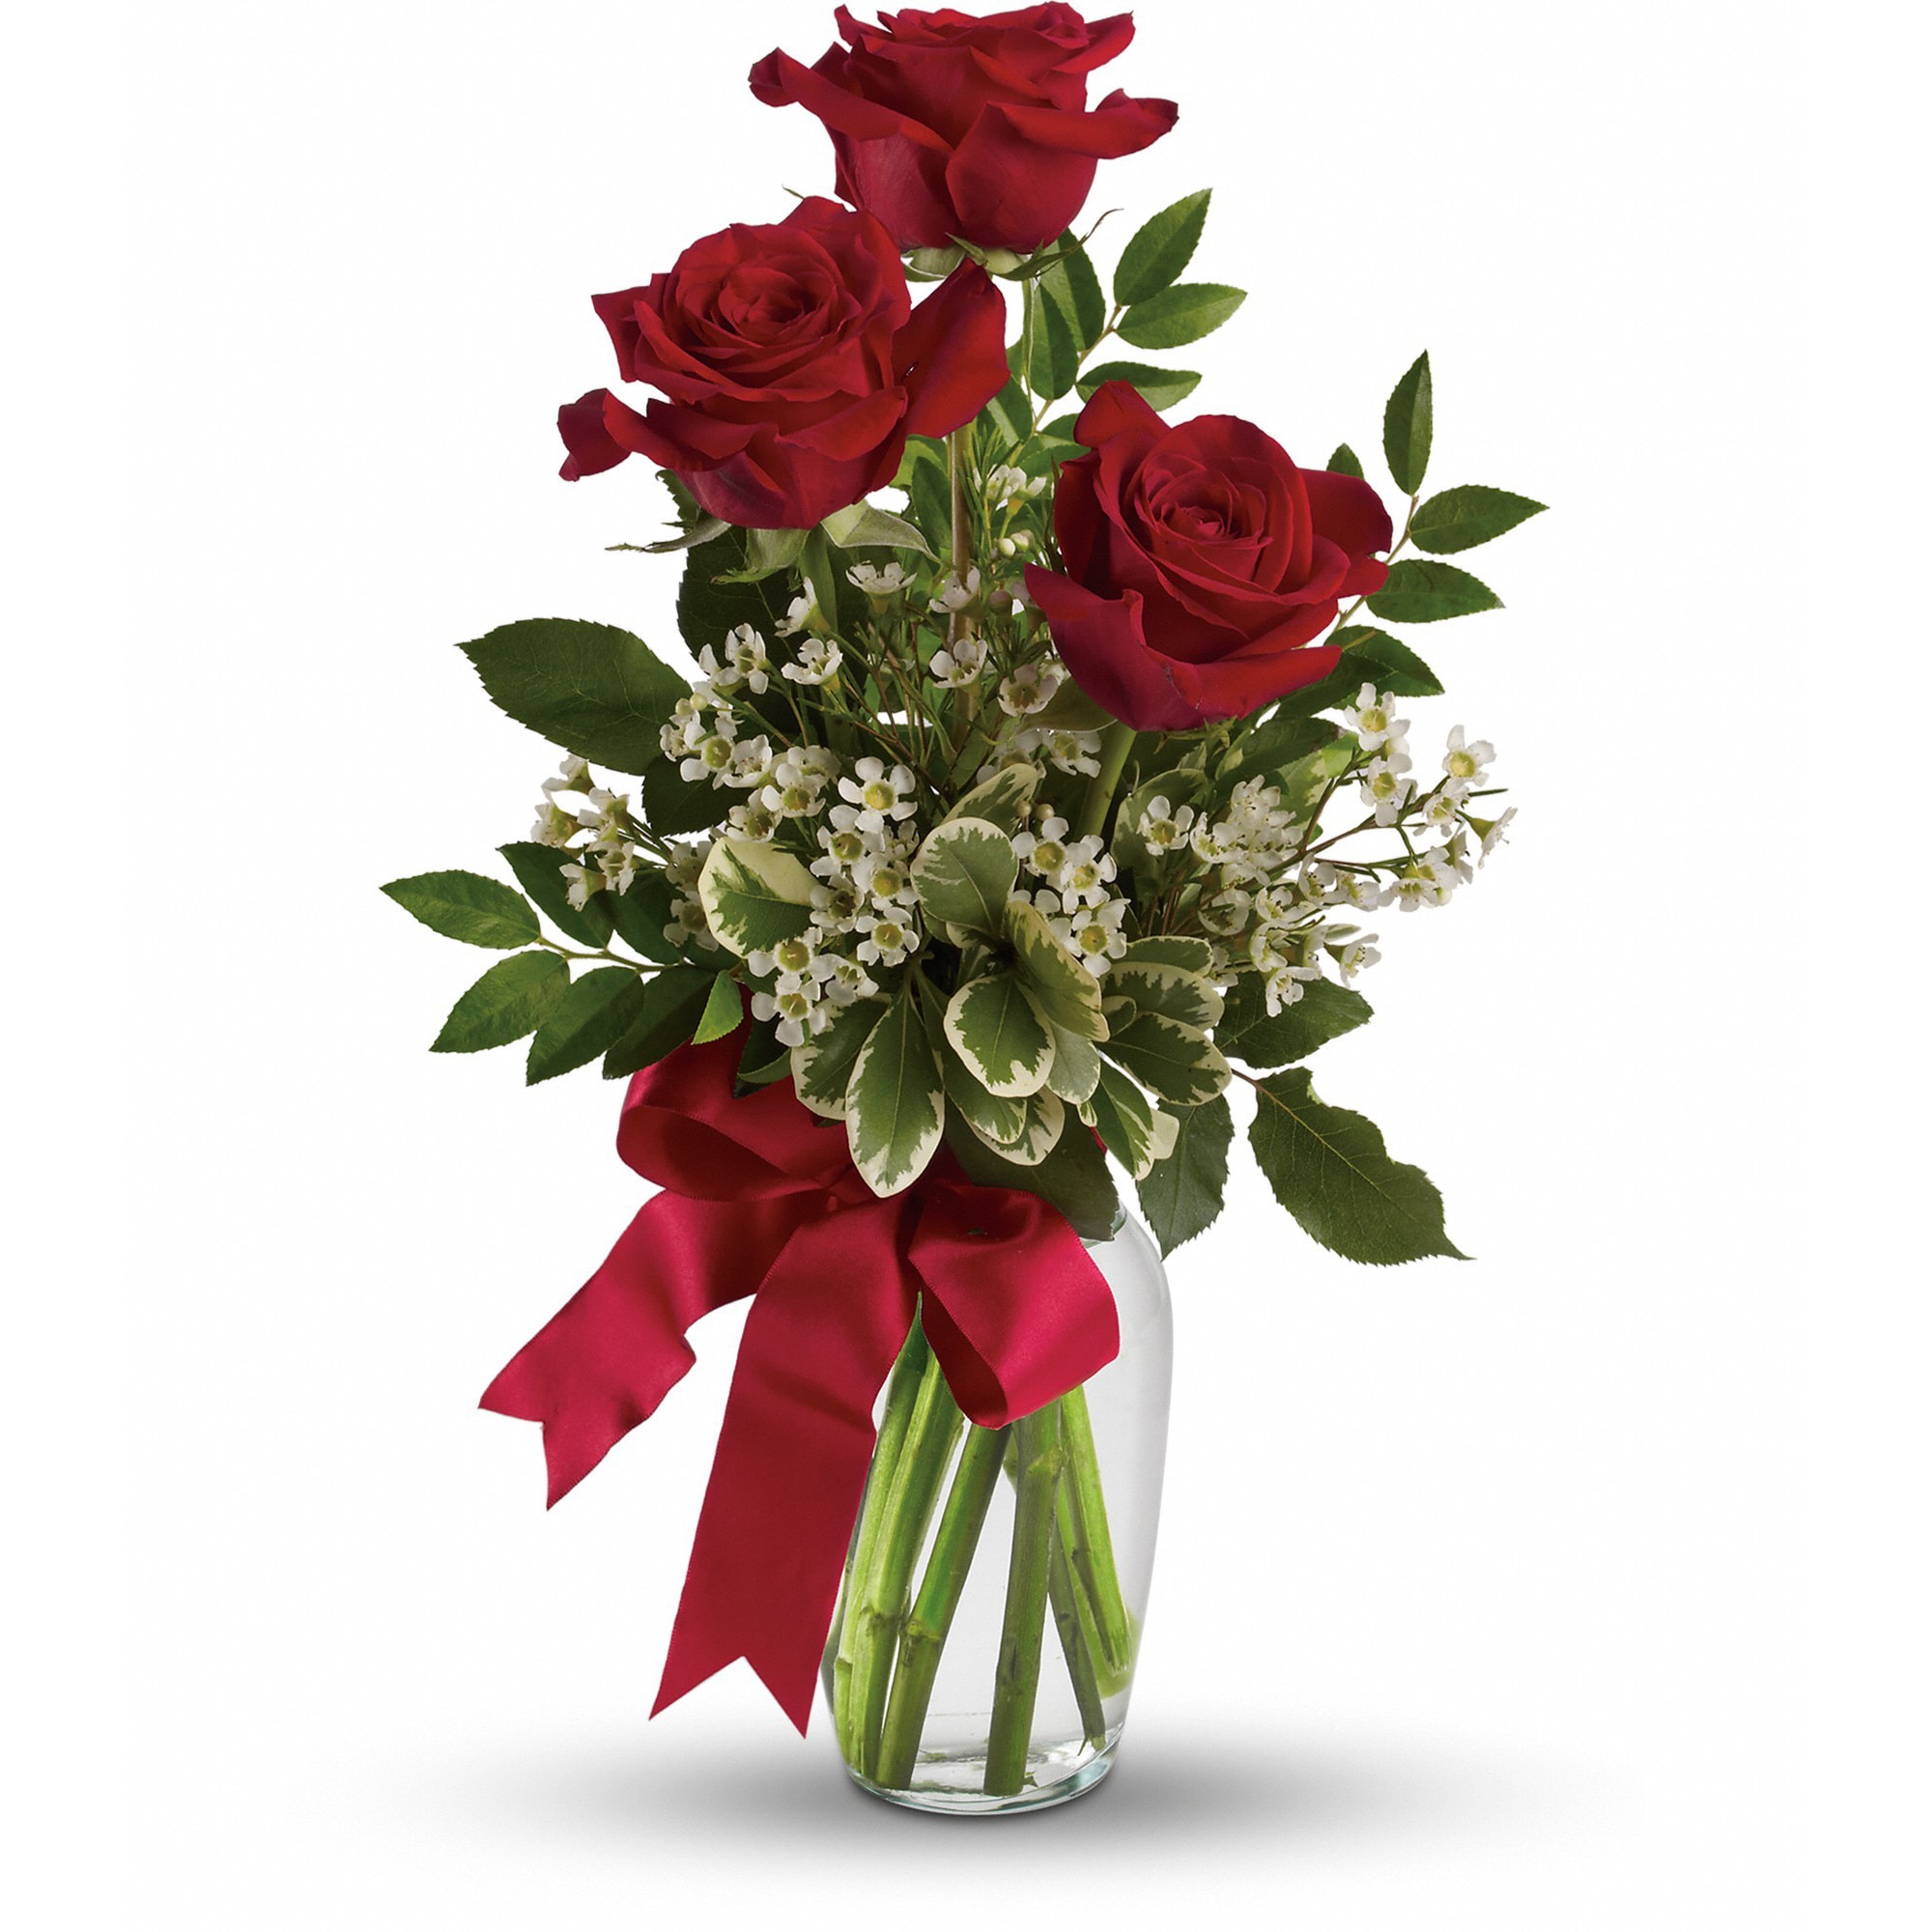 Thoughts of You Bouquet with Red Roses - It's the thought that counts, but it counts a bit more when it is expressed with three gorgeous red roses in a lovely arrangement tied up with a red satin ribbon. The flowers are bright and the price is right - the perfect combination for a sweet surprise. 